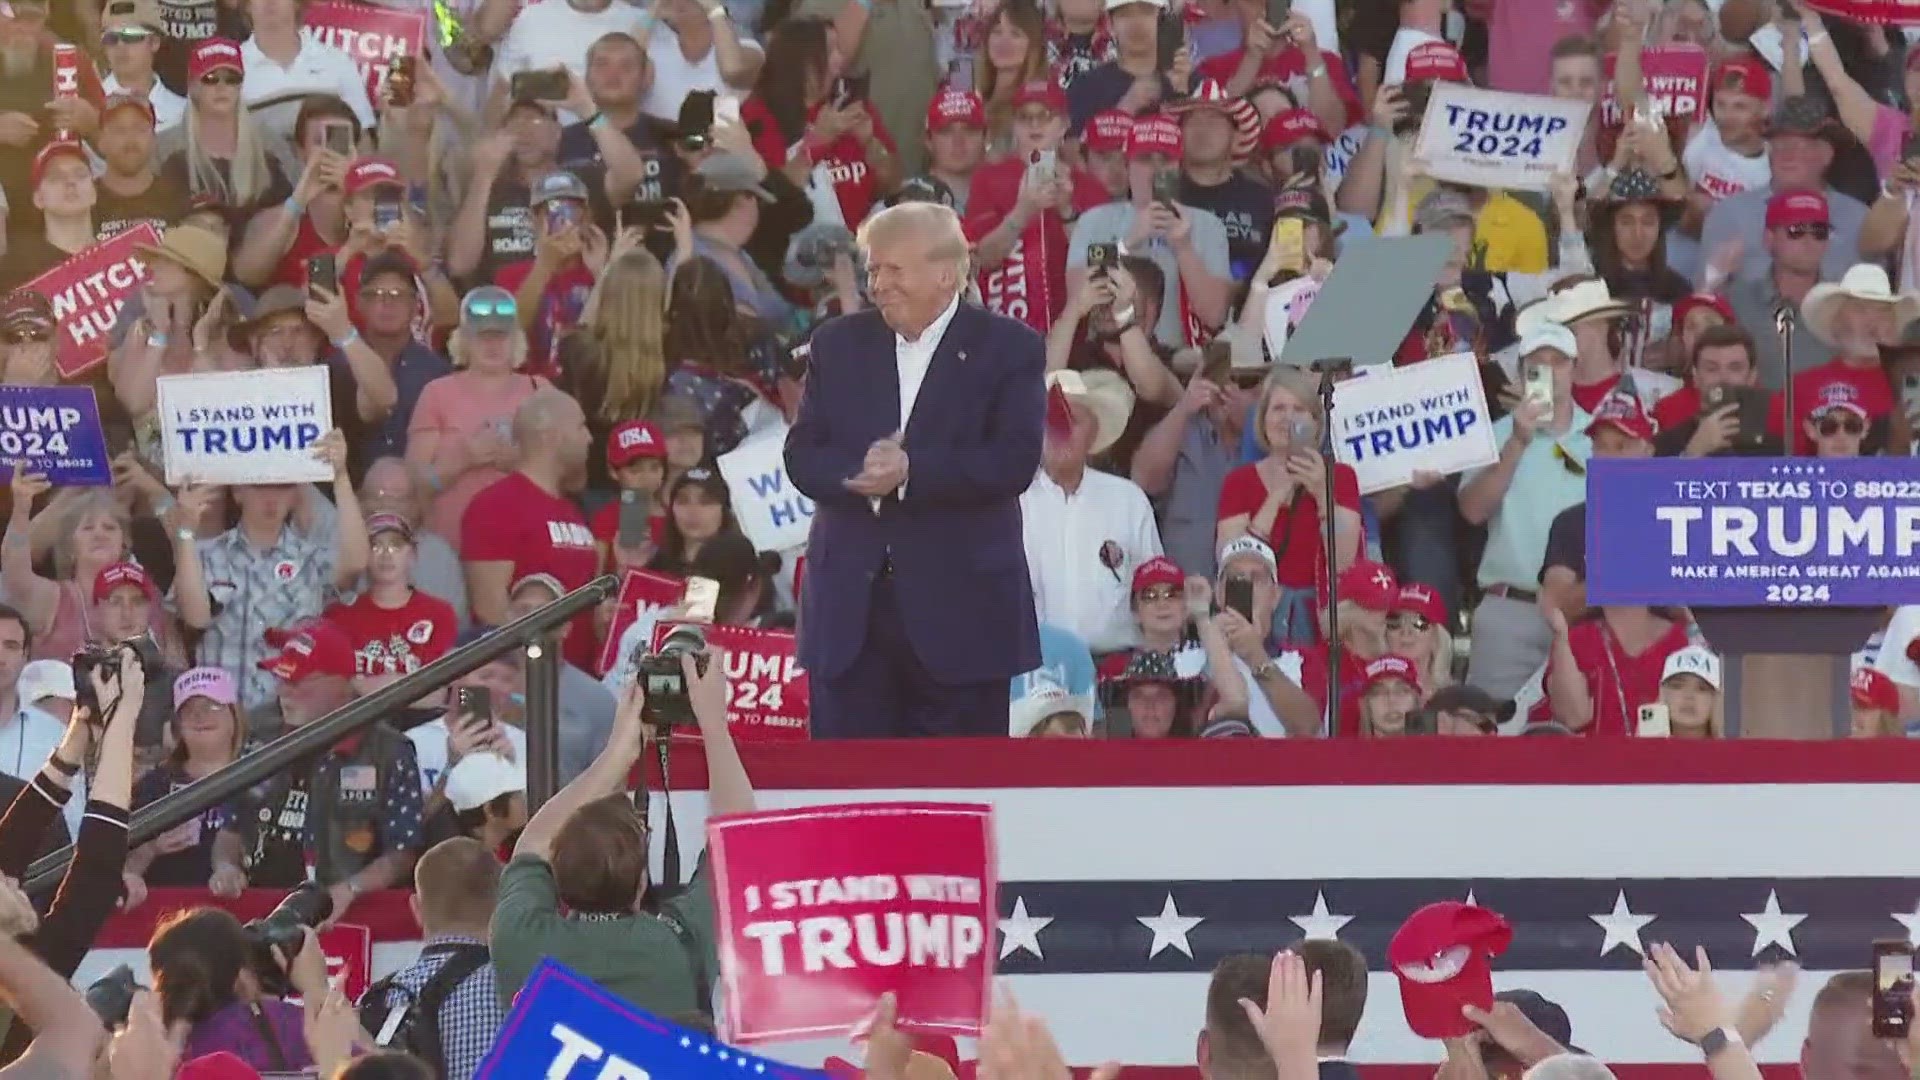 Thousands gathered in Waco to attend the former President's first rally on the 2024 campaign trail.